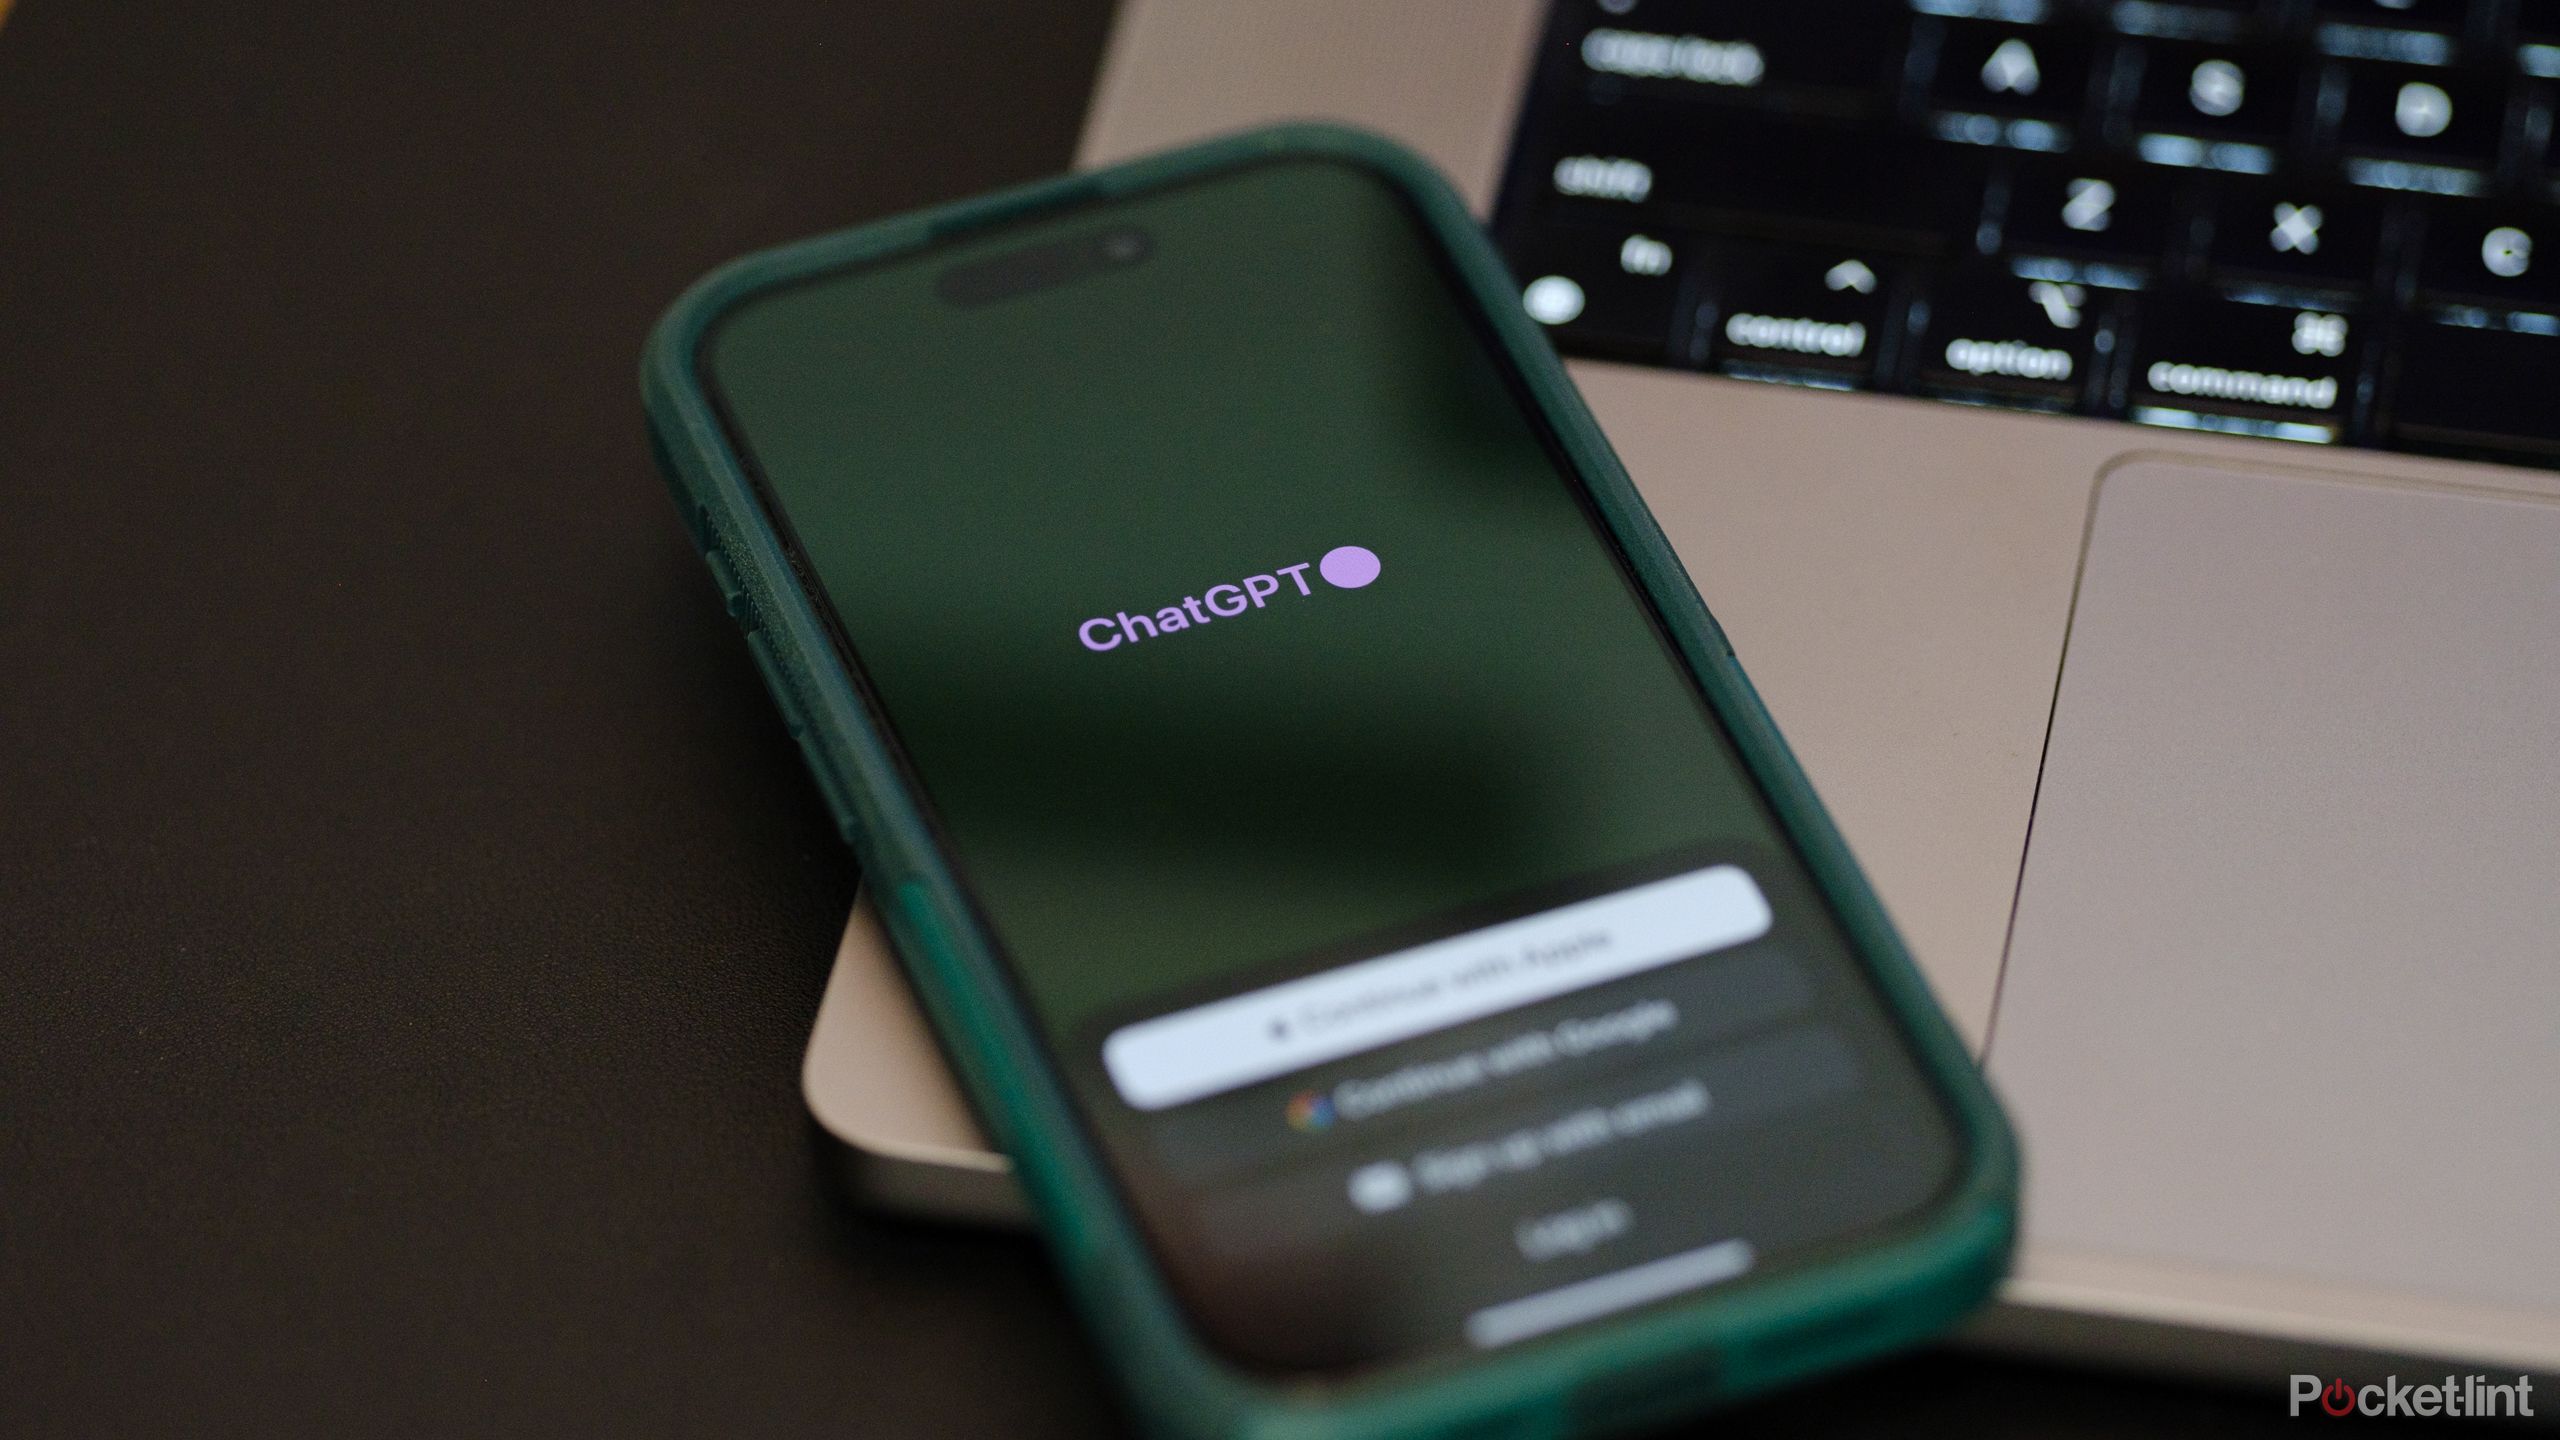 The ChatGPT app on an iPhone next to a MacBook